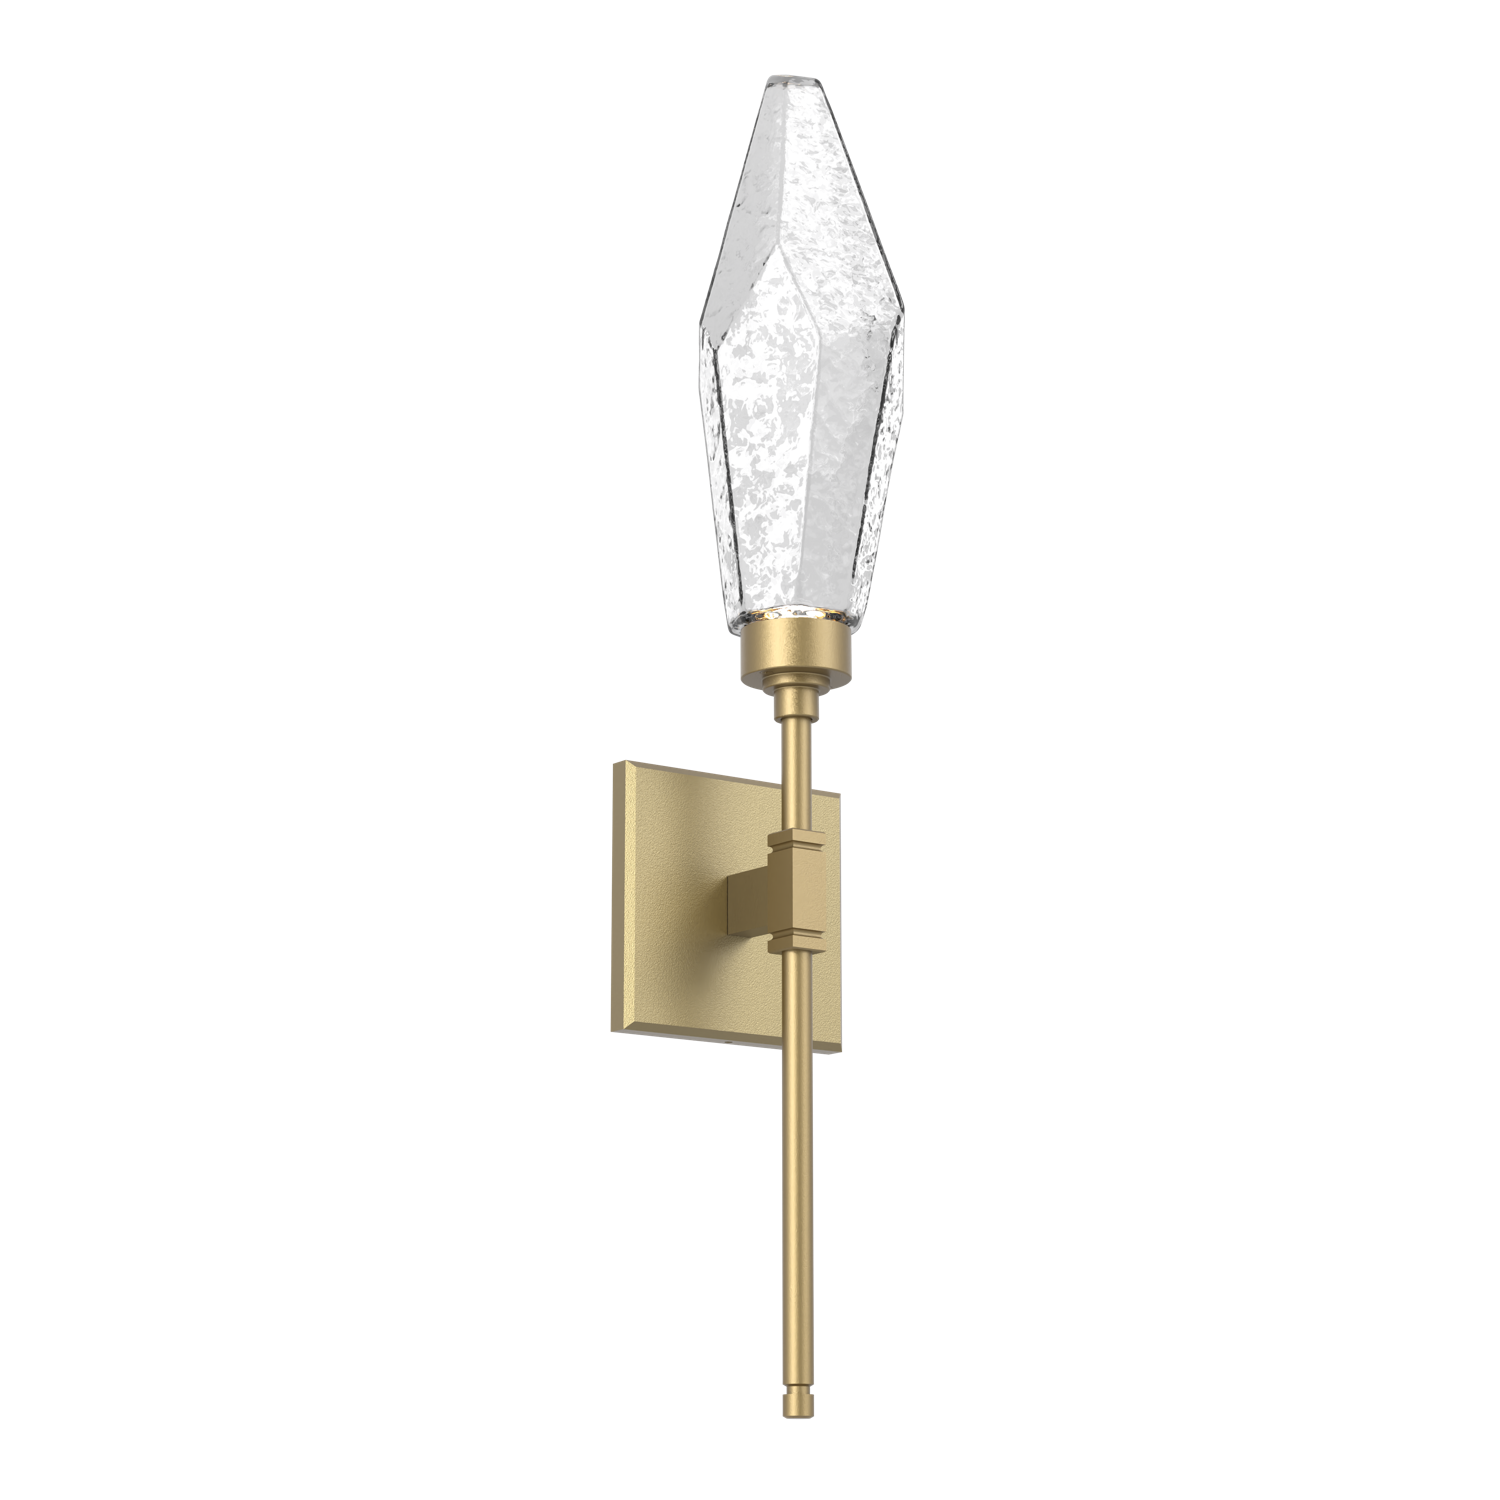 IDB0050-04-GB-CC-Hammerton-Studio-Rock-Crystal-ada-certified-belvedere-wall-sconce-with-gilded-brass-finish-and-clear-glass-shades-and-LED-lamping